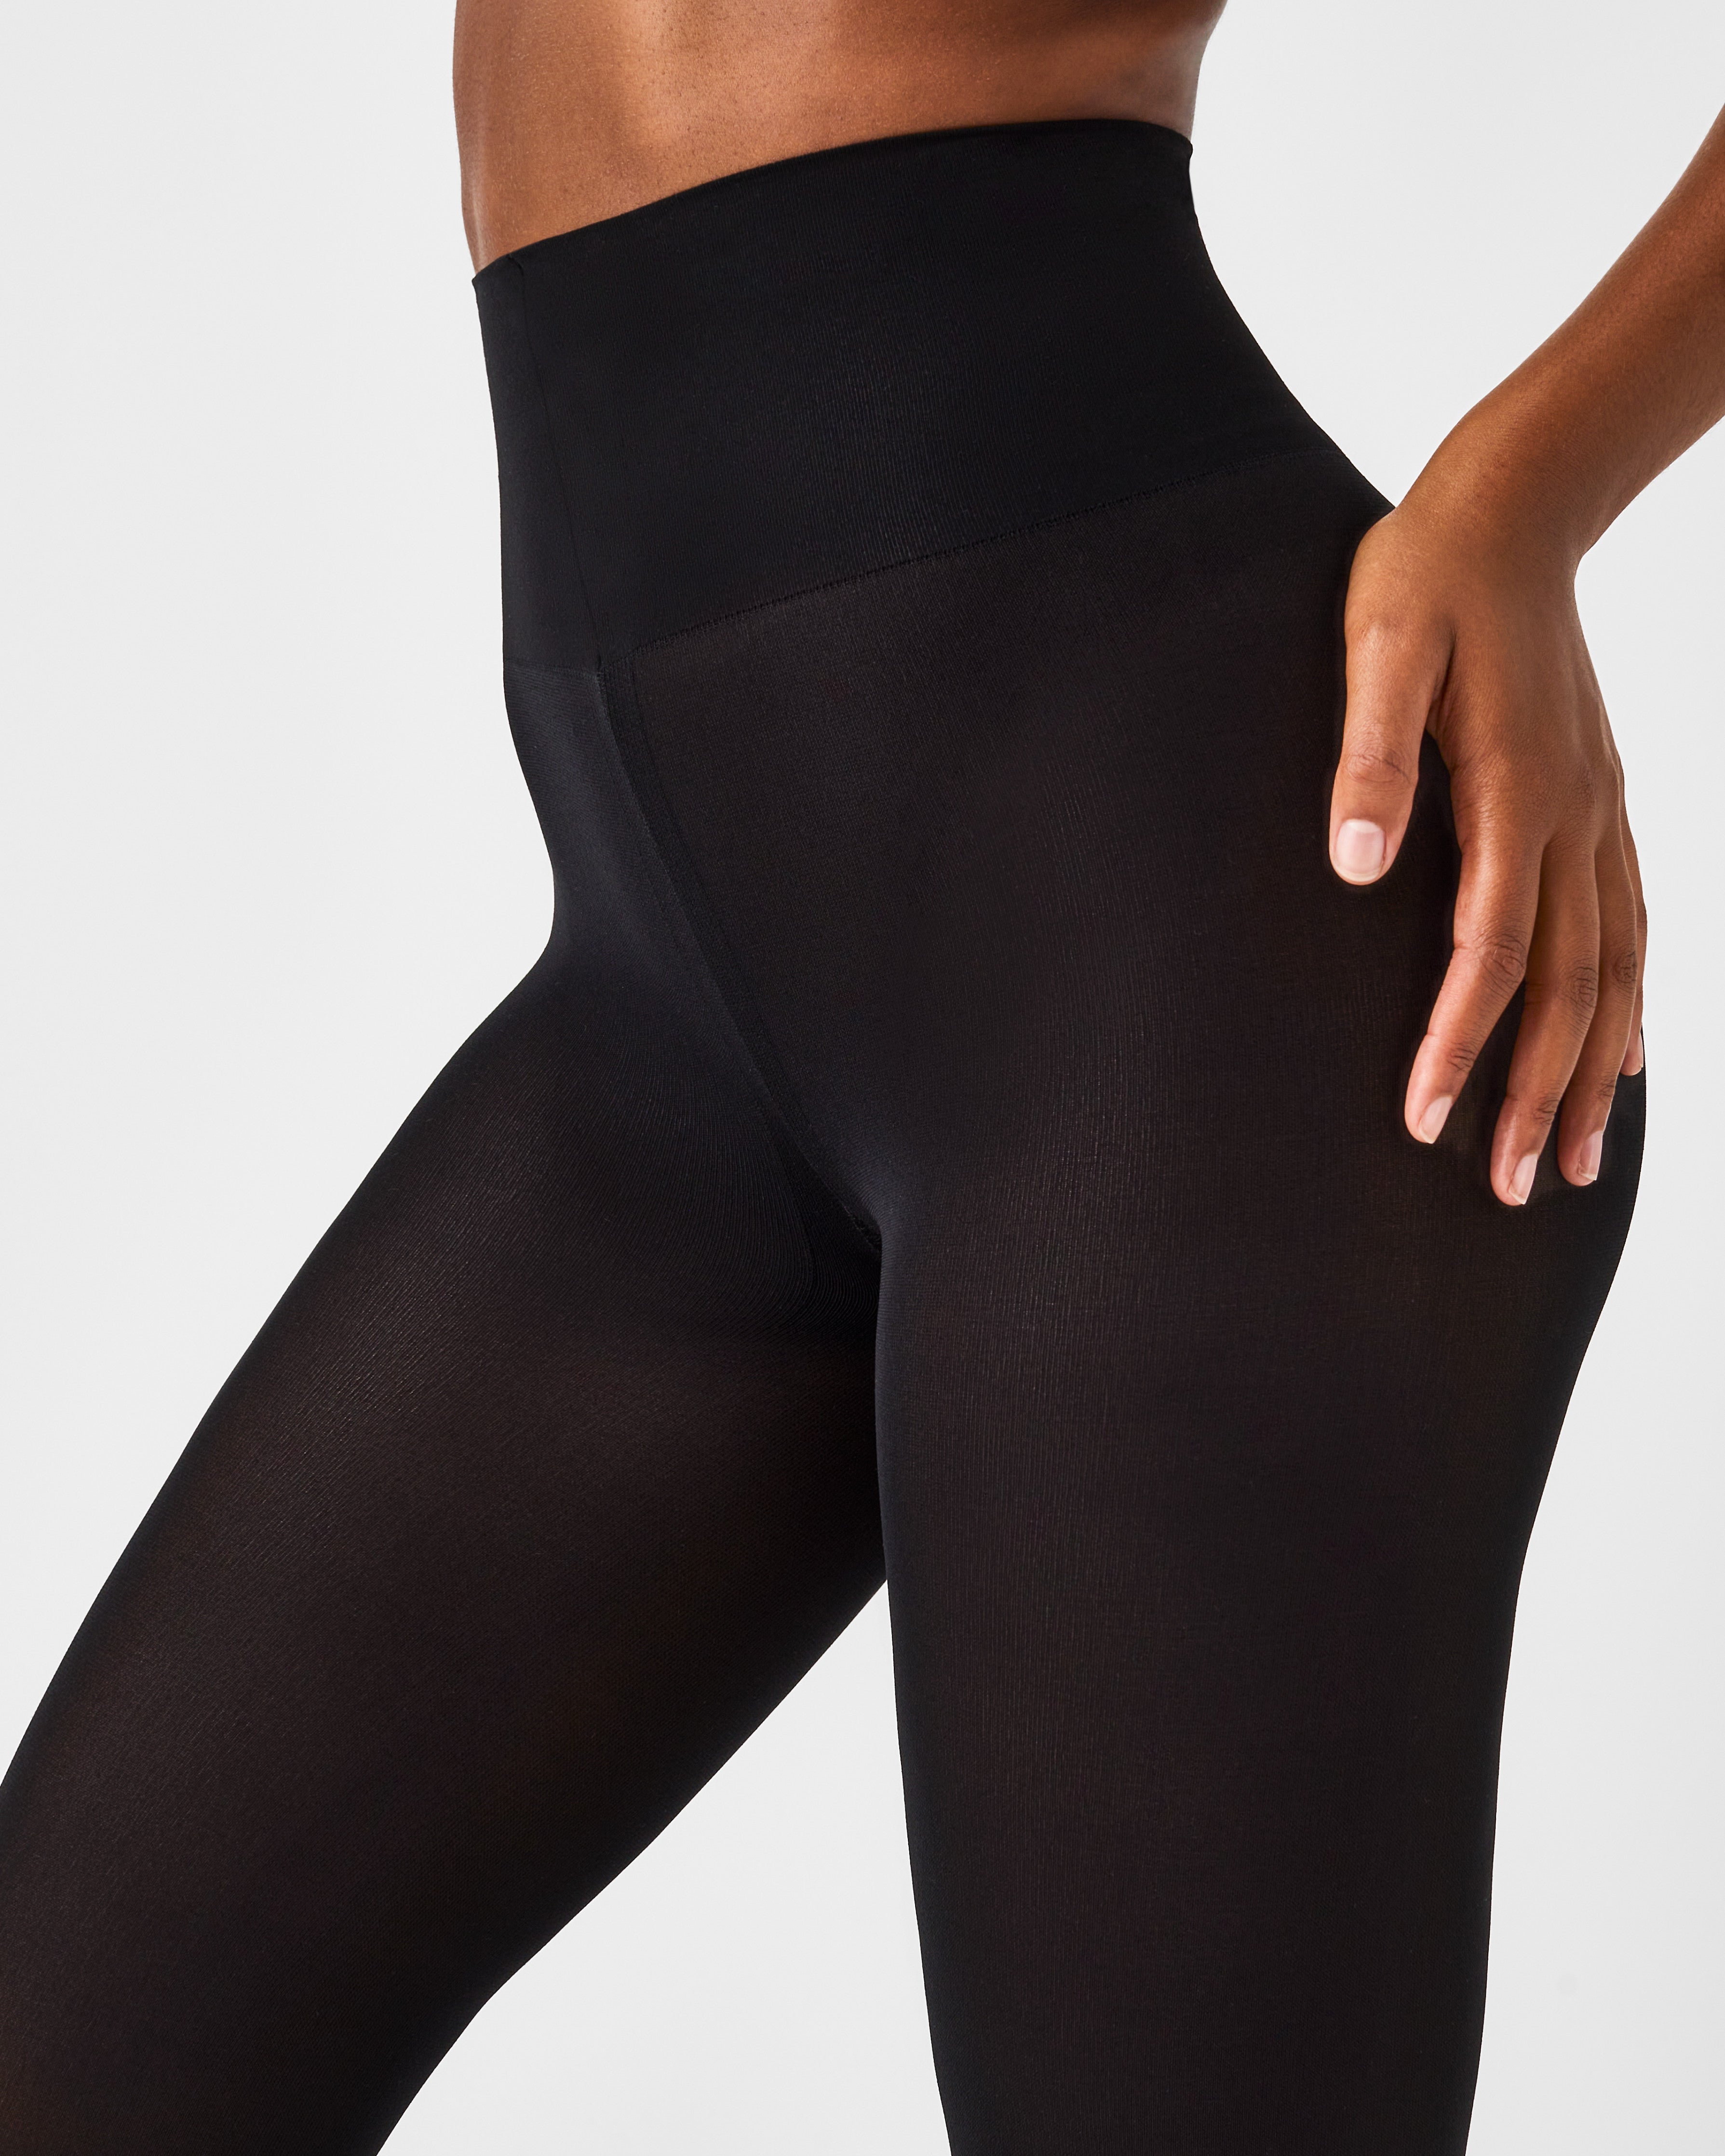 Assets by Spanx Cropped Shaping Leggings Sh2015 Tummy Control Black Size XL  for sale online